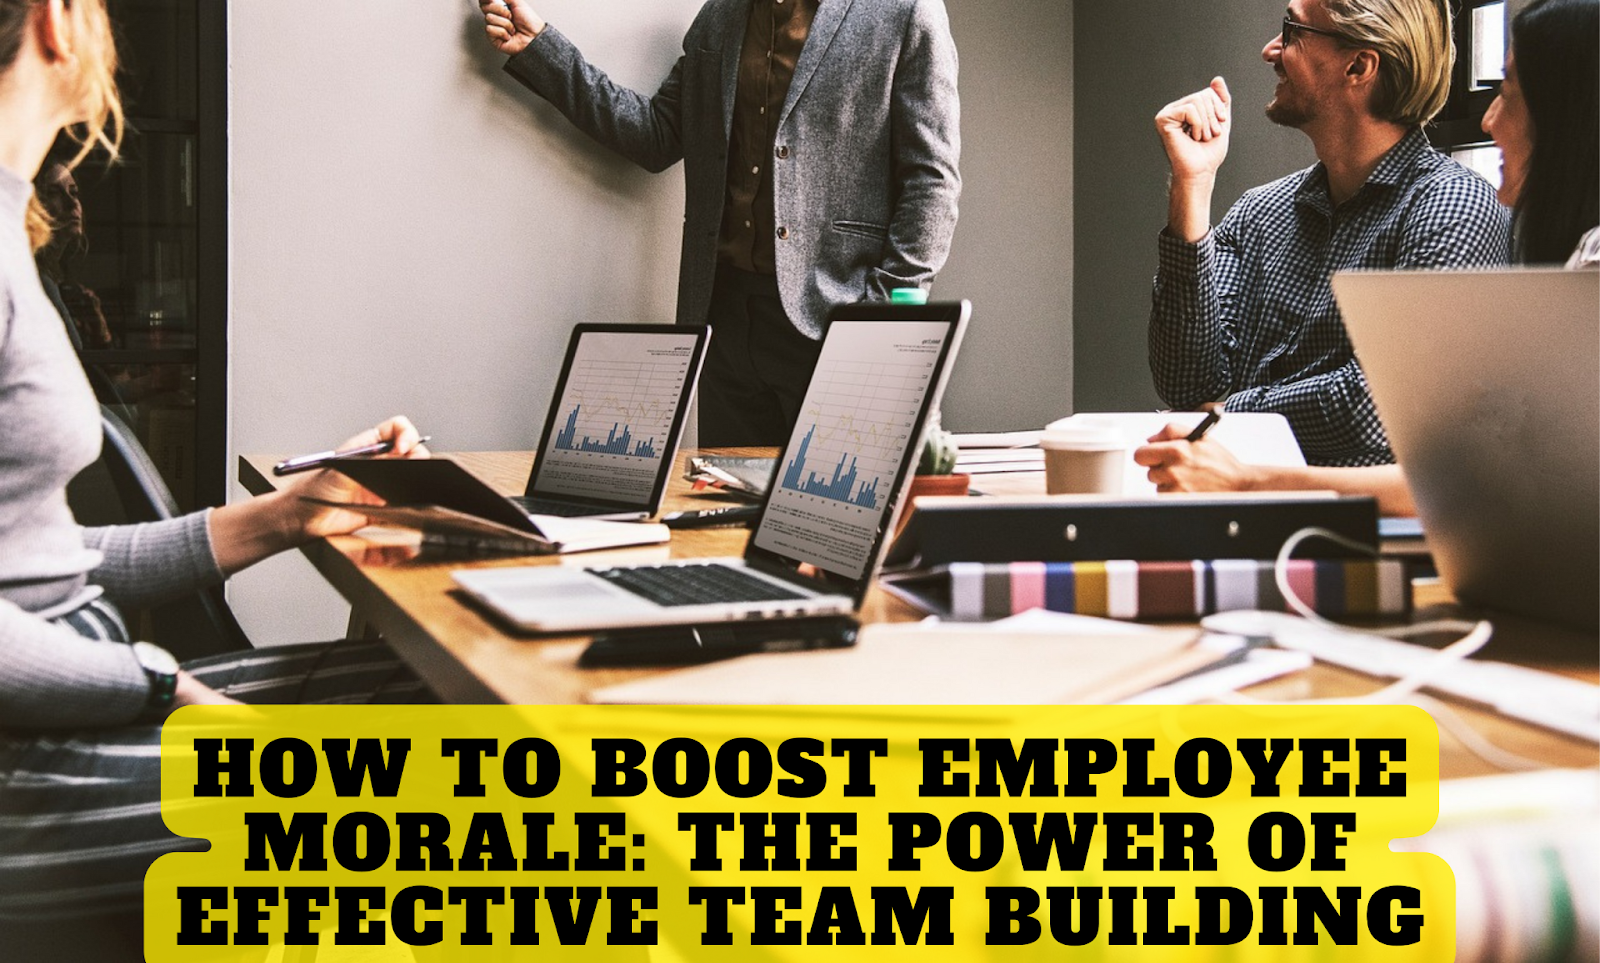 How to Boost Employee Morale: The Power of Effective Team Building